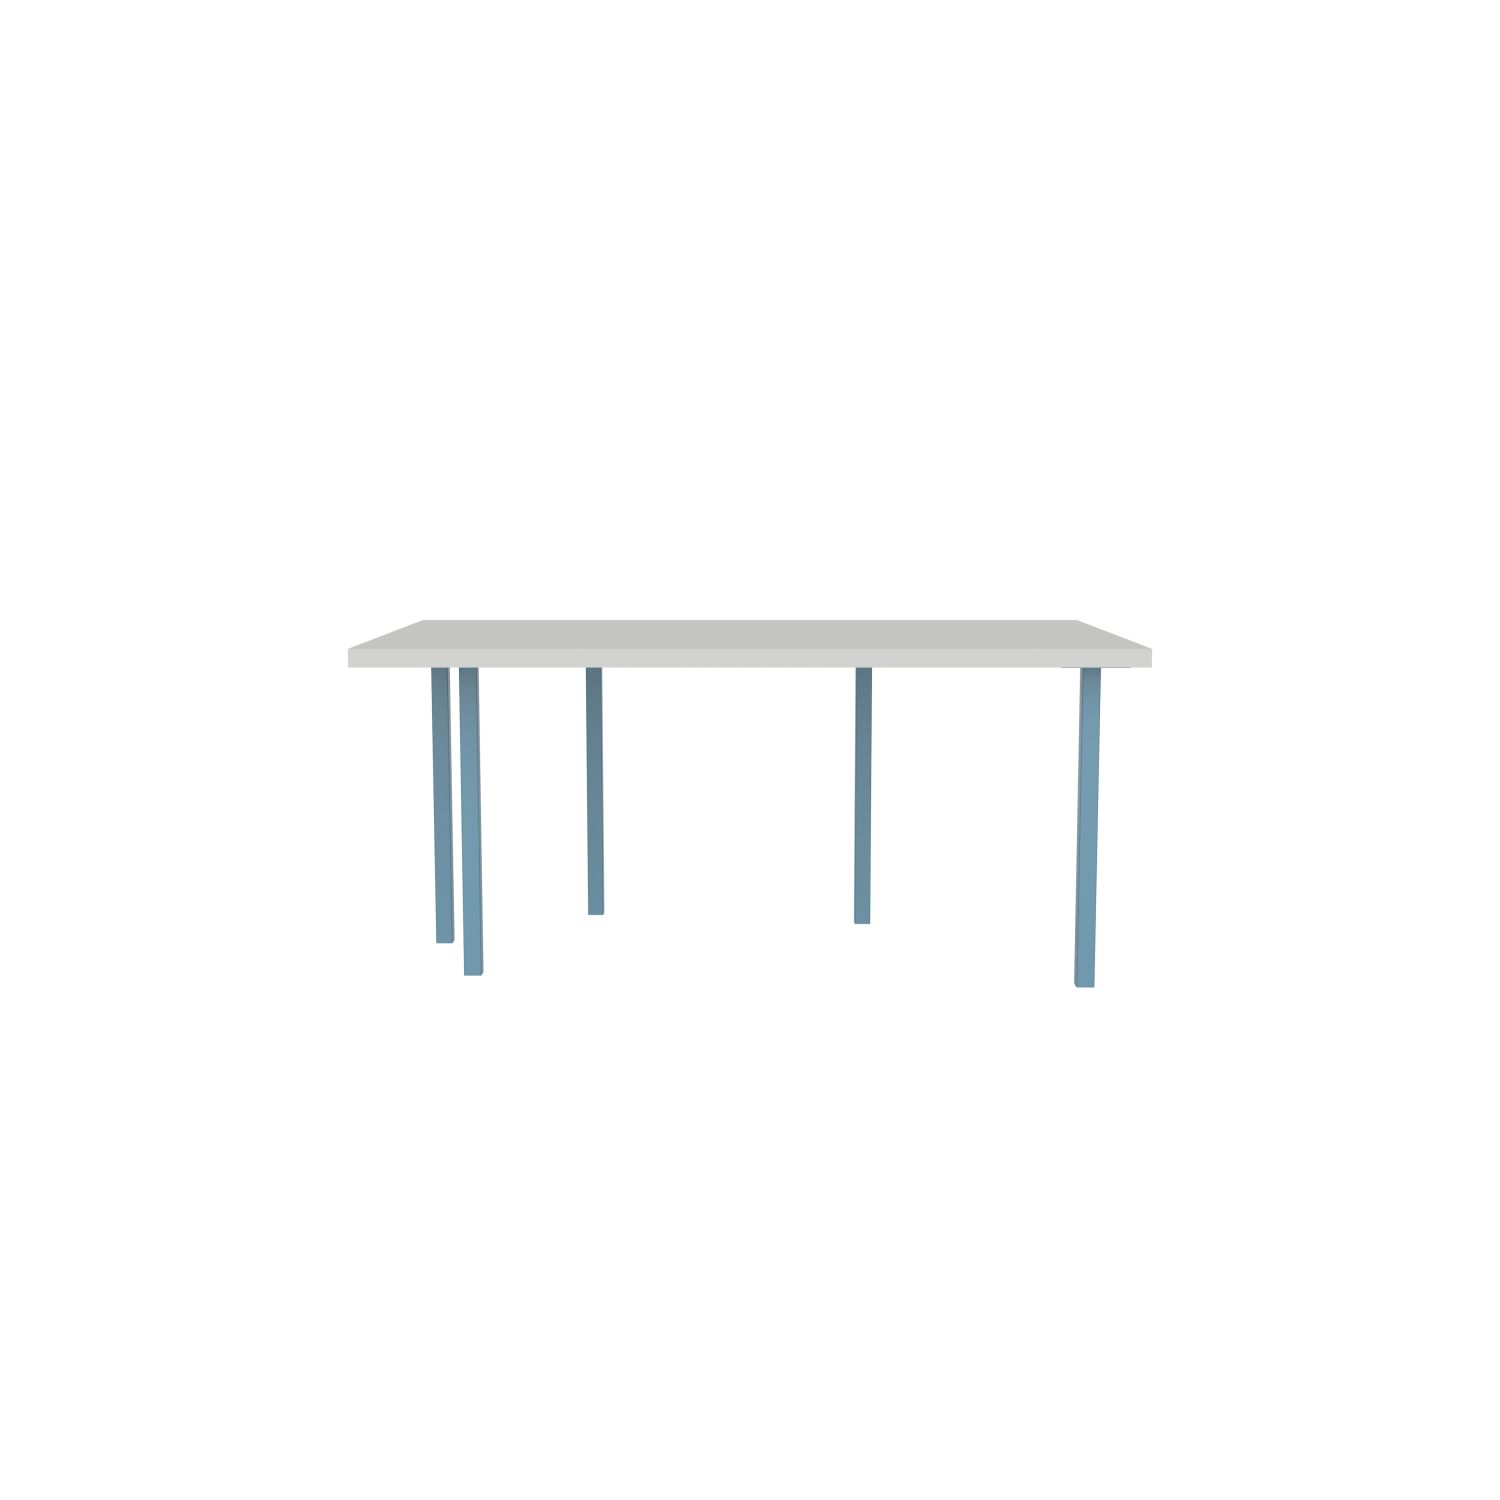 lensvelt bbrand table five fixed heigt 103x172 hpl boring grey 50 mm price level 1 blue ral5024